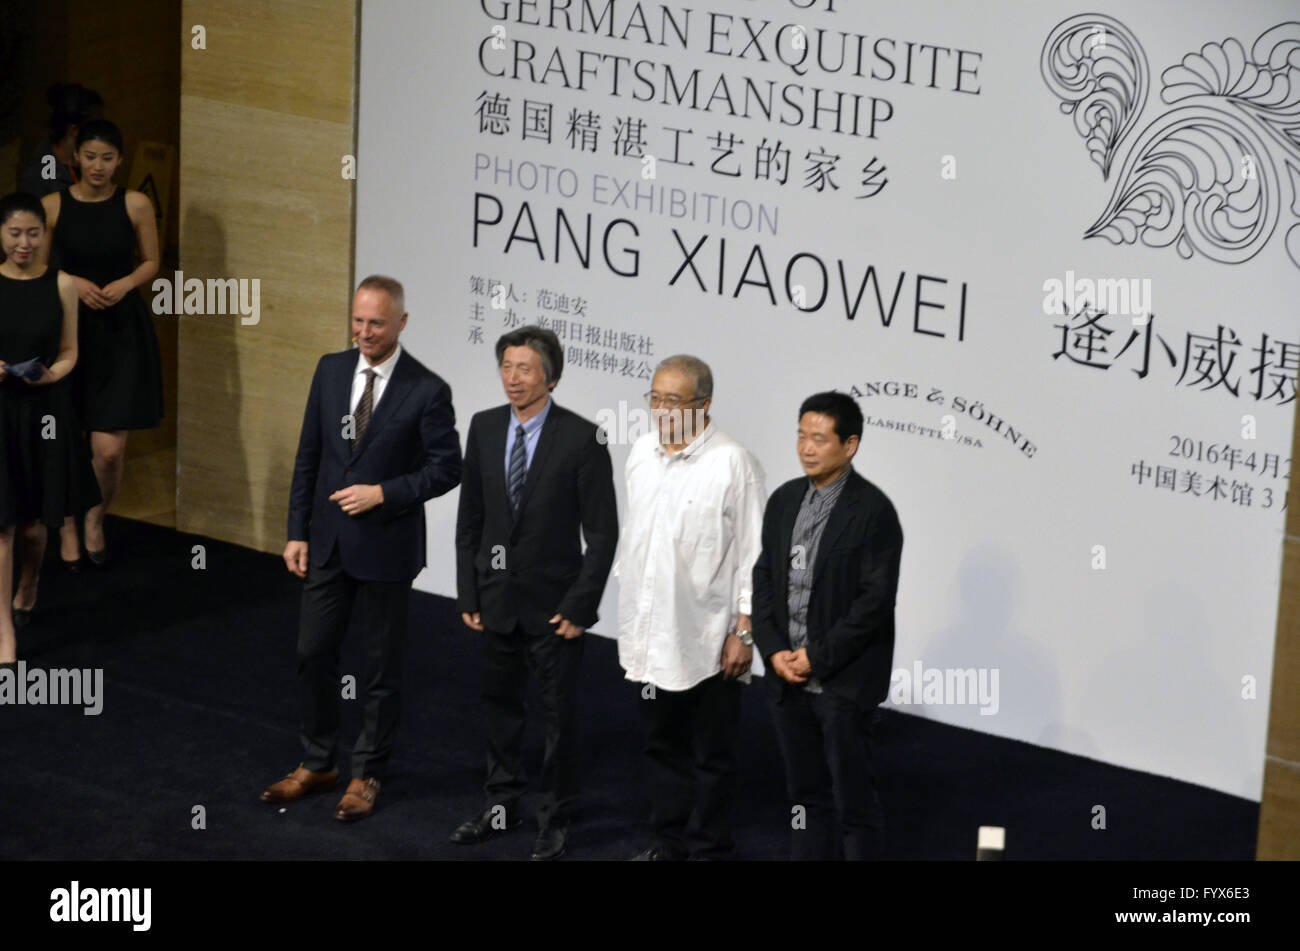 Beijing, Beijing, CHN, China. 26th Apr, 2016. Beijing, CHINA - April 26 2016: (EDITORIAL USE ONLY. CHINA OUT ) Photography Exhibition by Pang Xiaowei called ''Freistaat Sachsen: Home to extraordinary German technology'' started at National Museum of China at 4pm on April 26. This place is connected with great names as Martin Luther, Bach, Goethe, Webb, Schuhmann, Wagner, Nitzsch. © SIPA Asia/ZUMA Wire/Alamy Live News Stock Photo